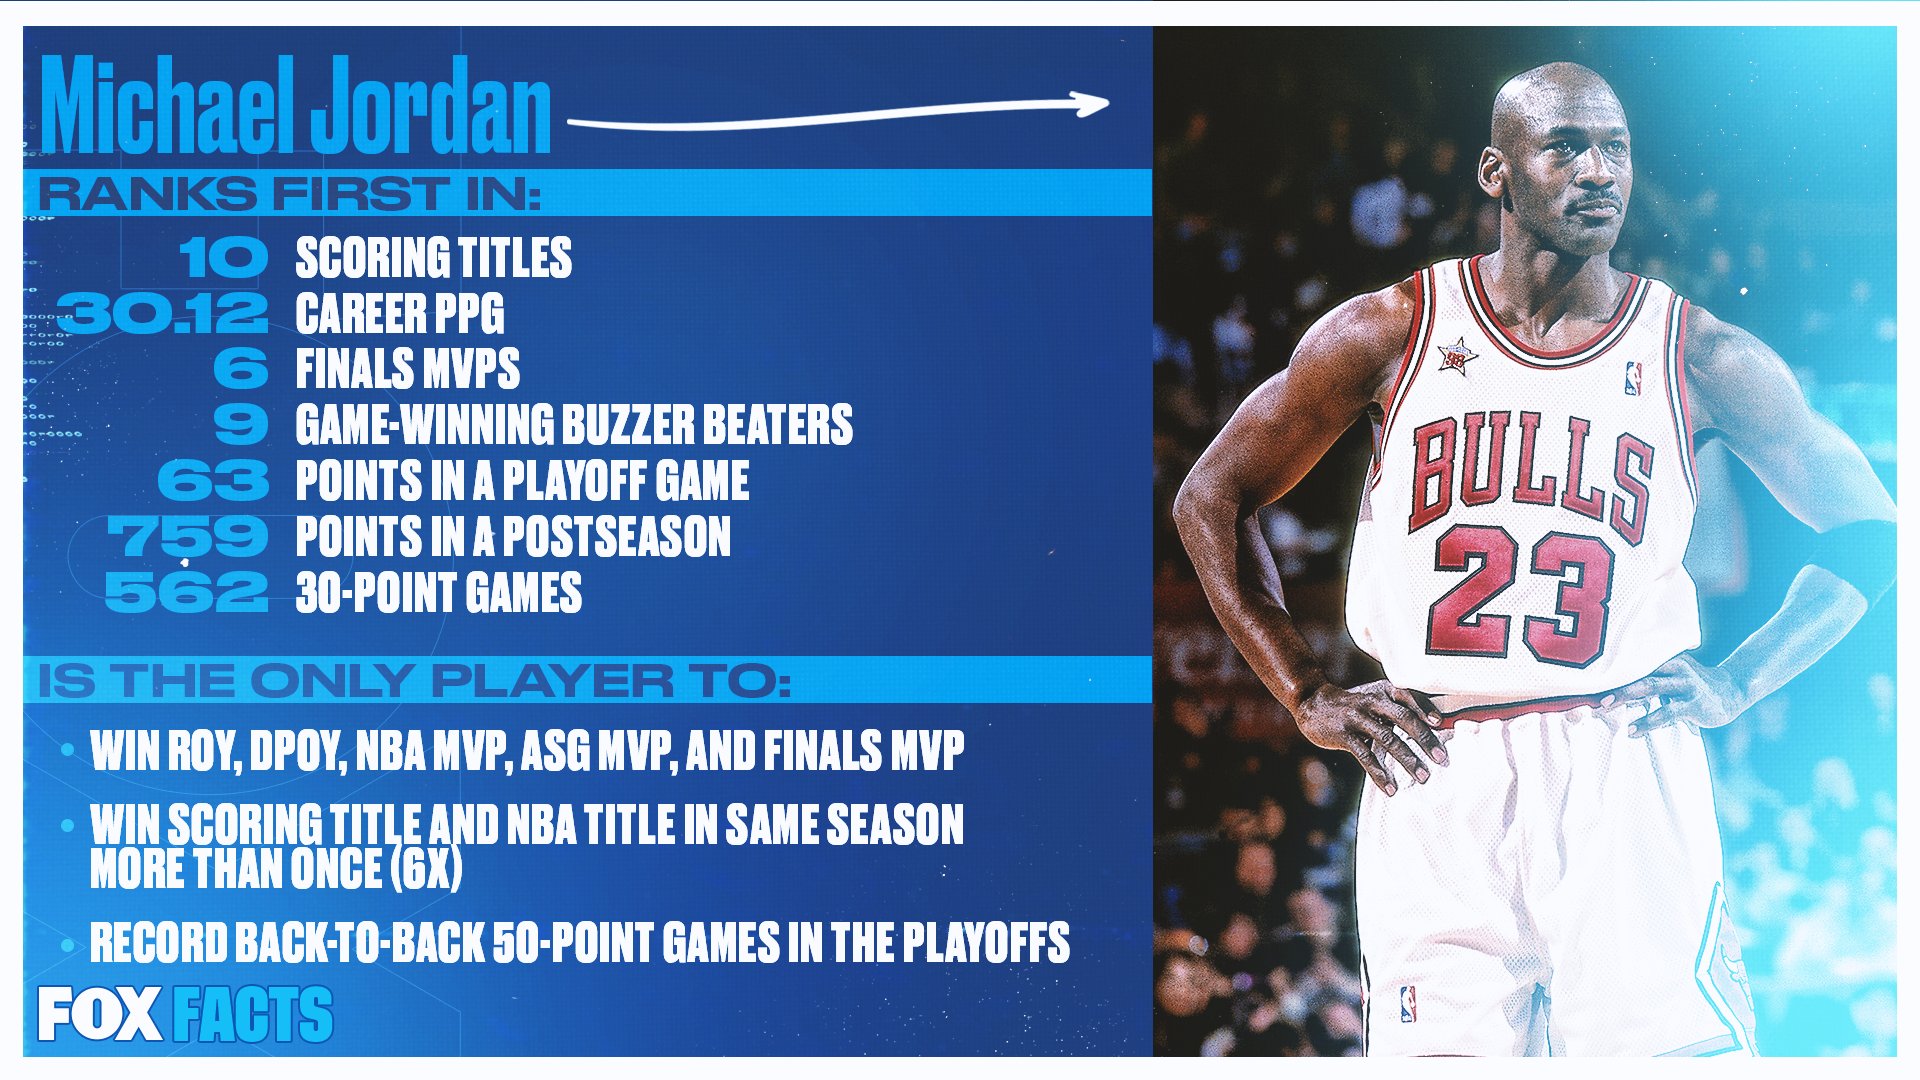 bombe Middelhavet brochure FOX Sports on Twitter: "Michael Jordan's career resume might be the most  impressive thing you see today. #FOXFacts https://t.co/ciaNnMhG9h" / Twitter